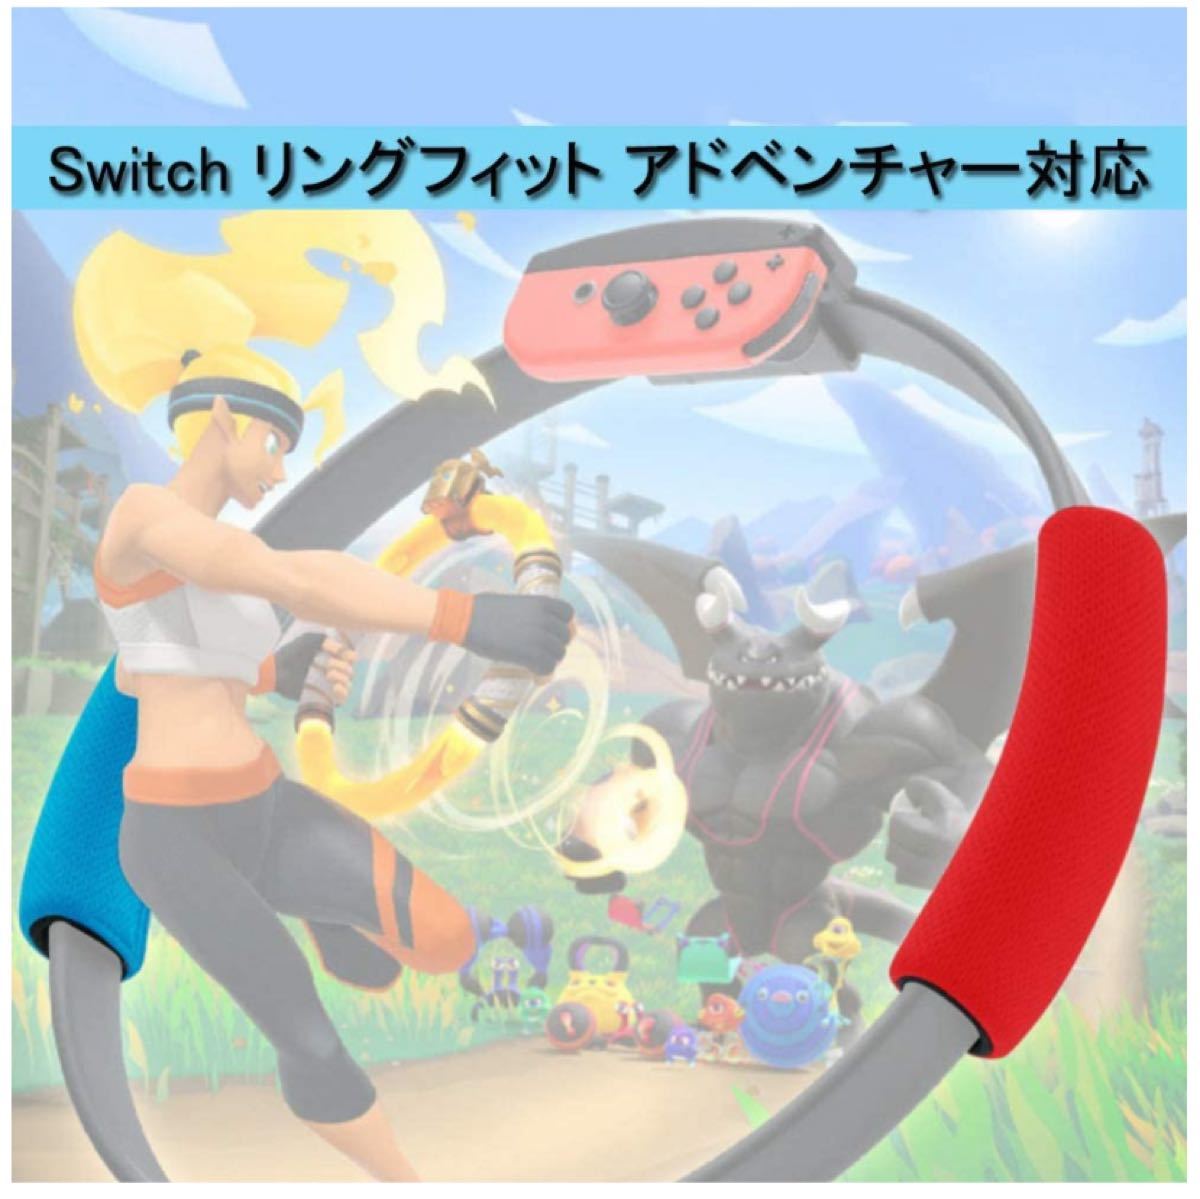 Switch スイッチ リングコン 用 リンググリップ